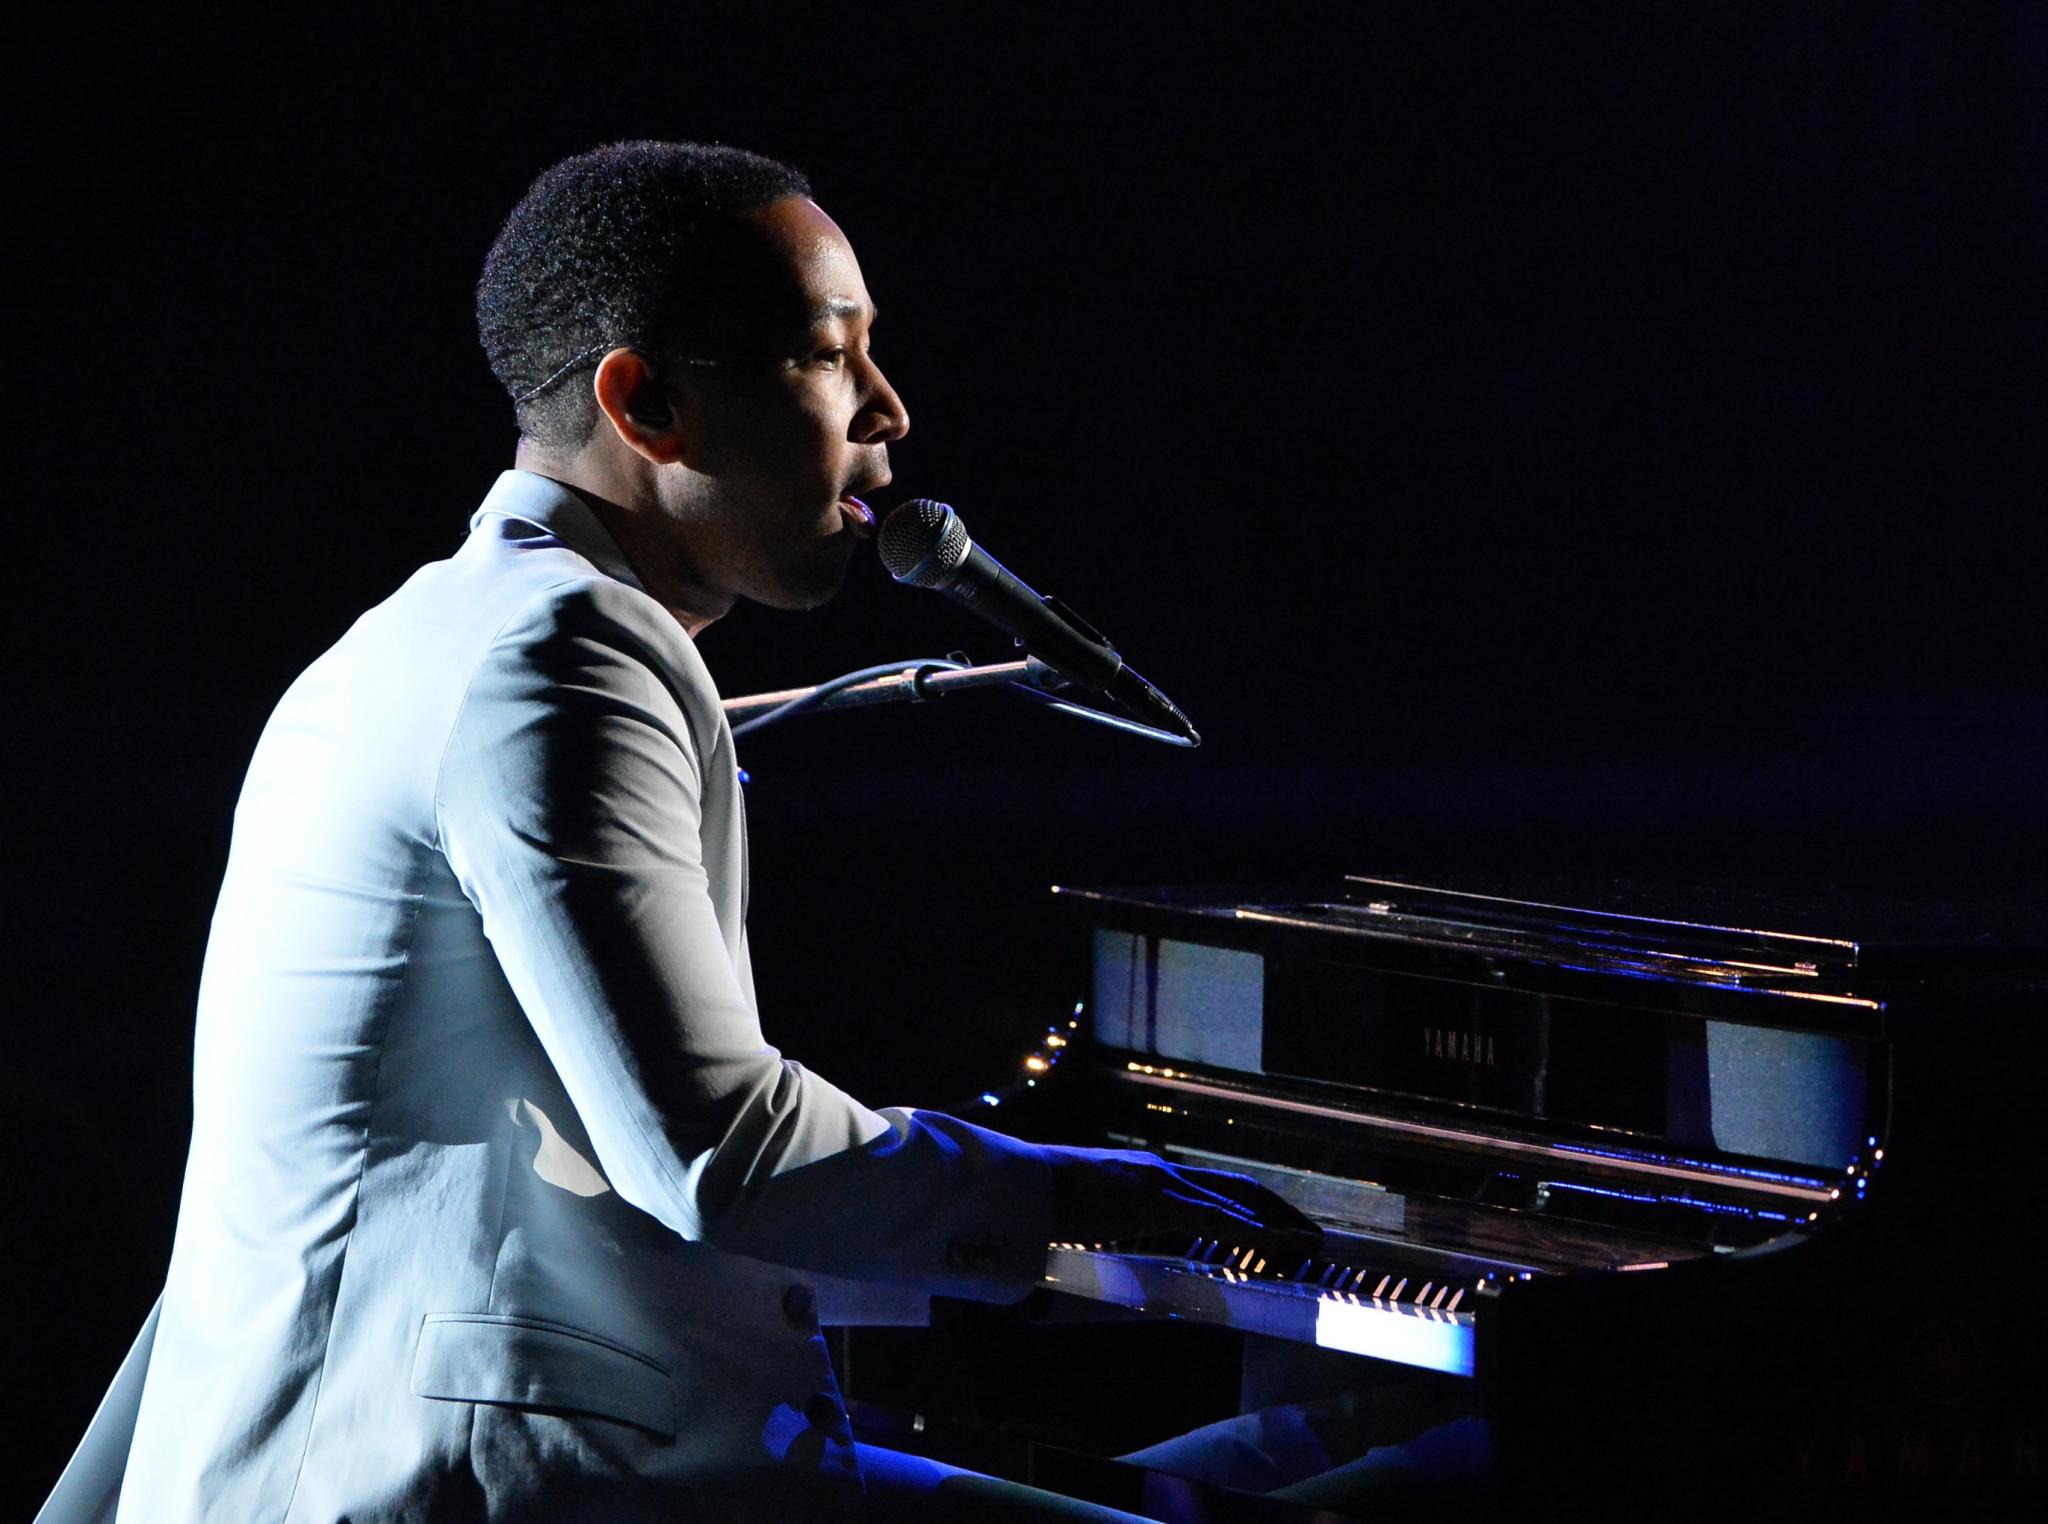 LISTEN: John Legend Confronts The Harsh Realities Of The American Dream With New Song 'In America'
